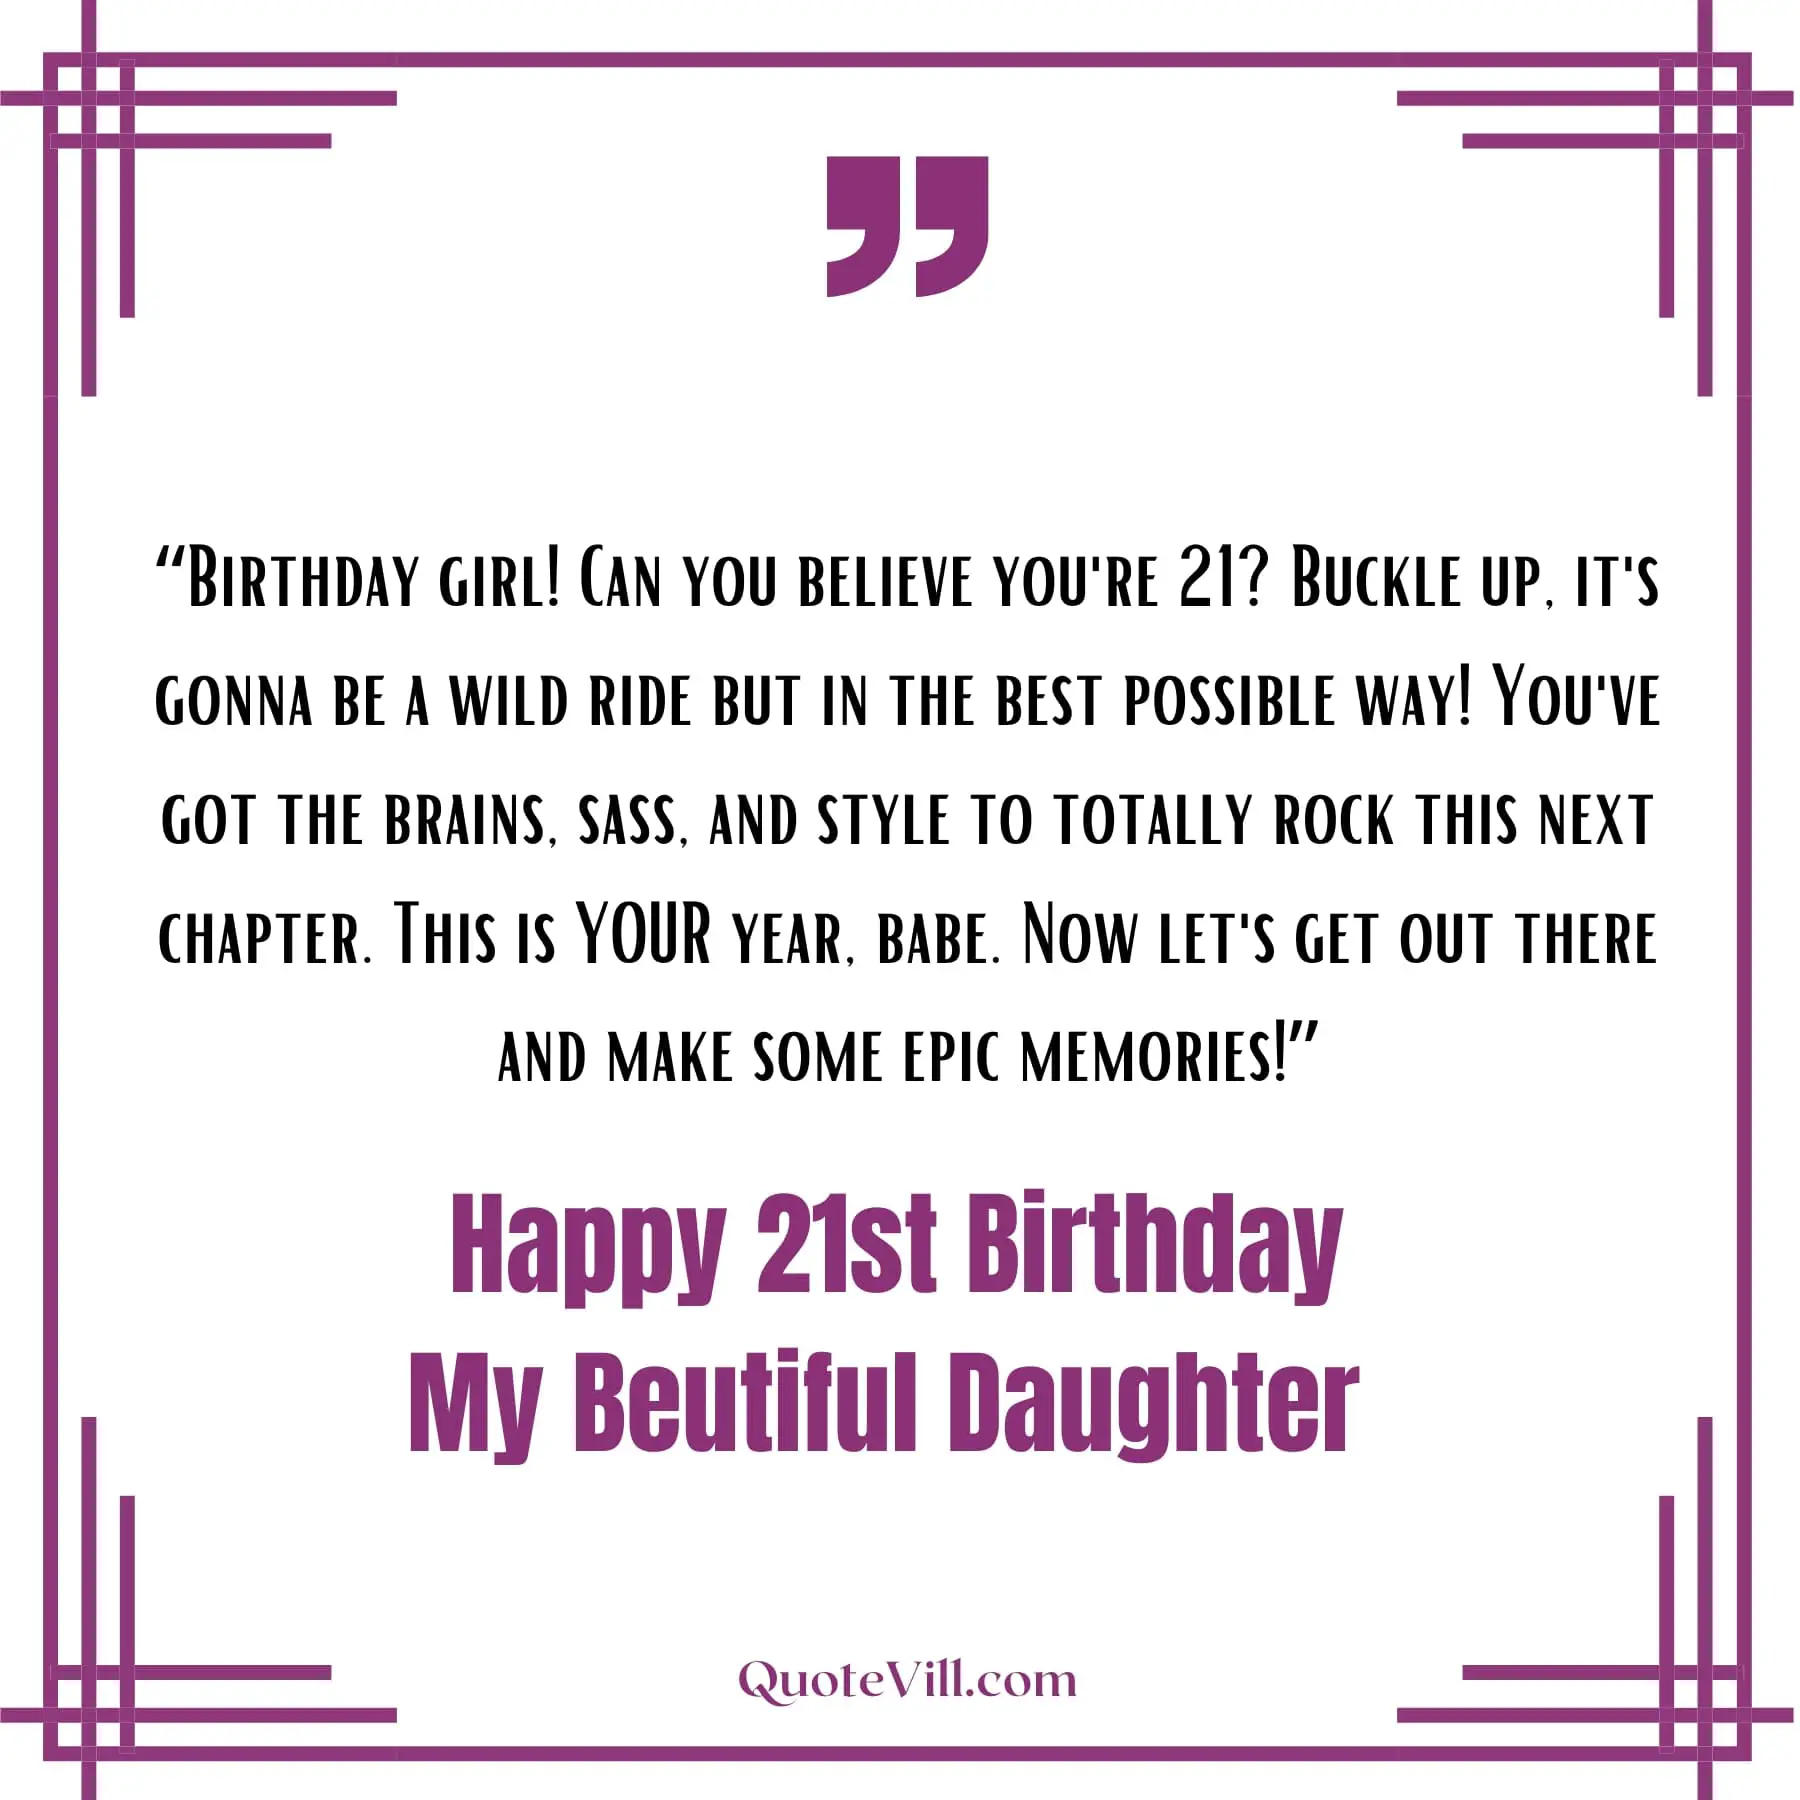 Best-Happy-21st-Birthday-Wishes-For-Daughter-